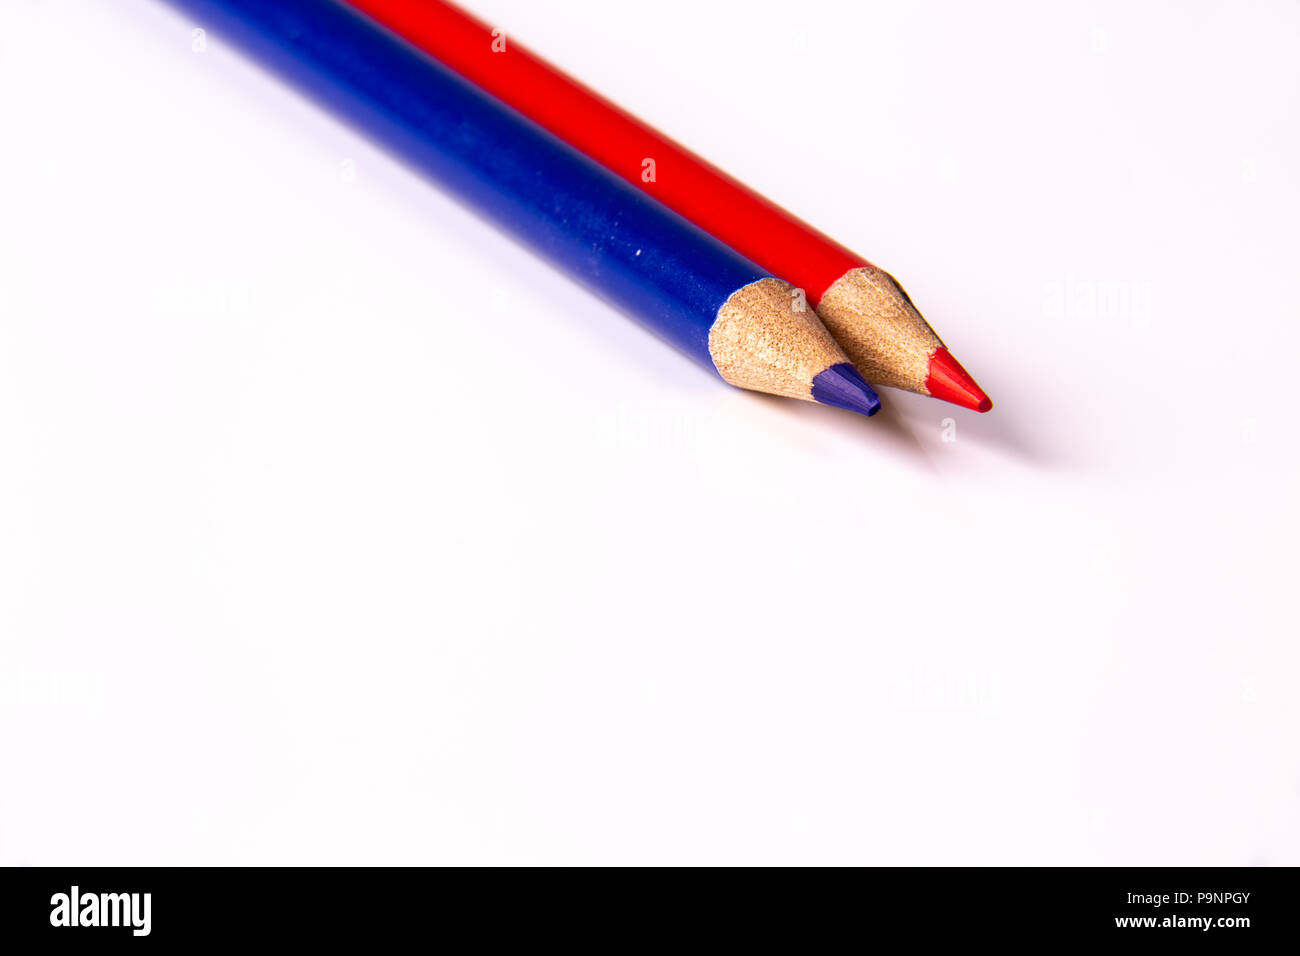 Red and blue contrasting color pencils on white reflective acrylic. Stock Photo